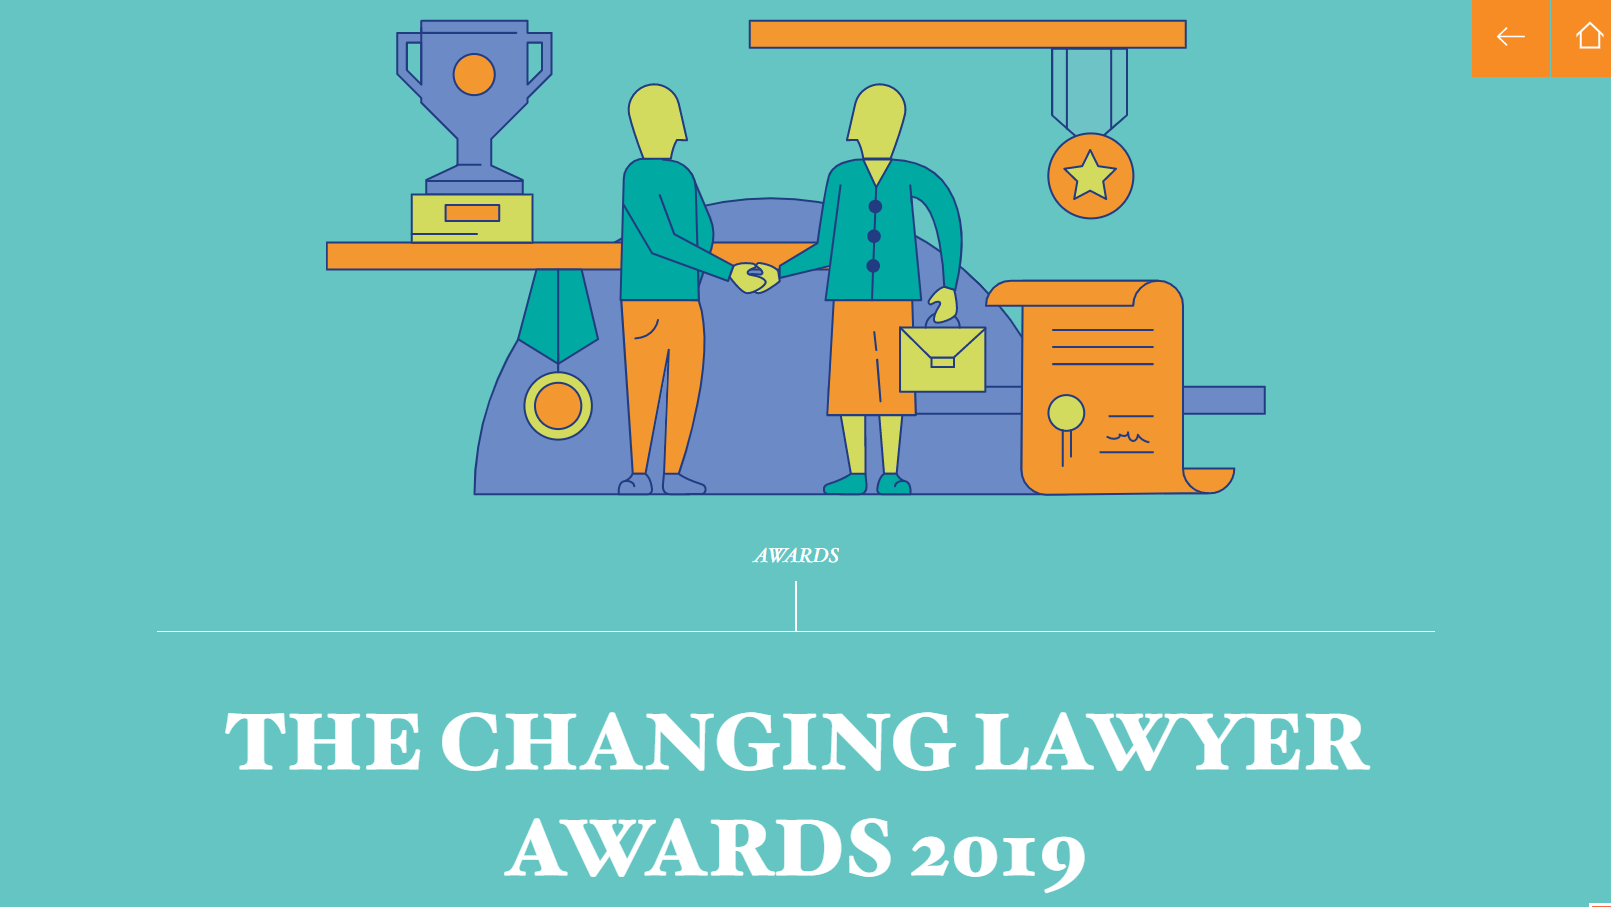 Nominations Open For 2019 Changing Lawyer Awards, Recognizing Drivers Of Change in Legal